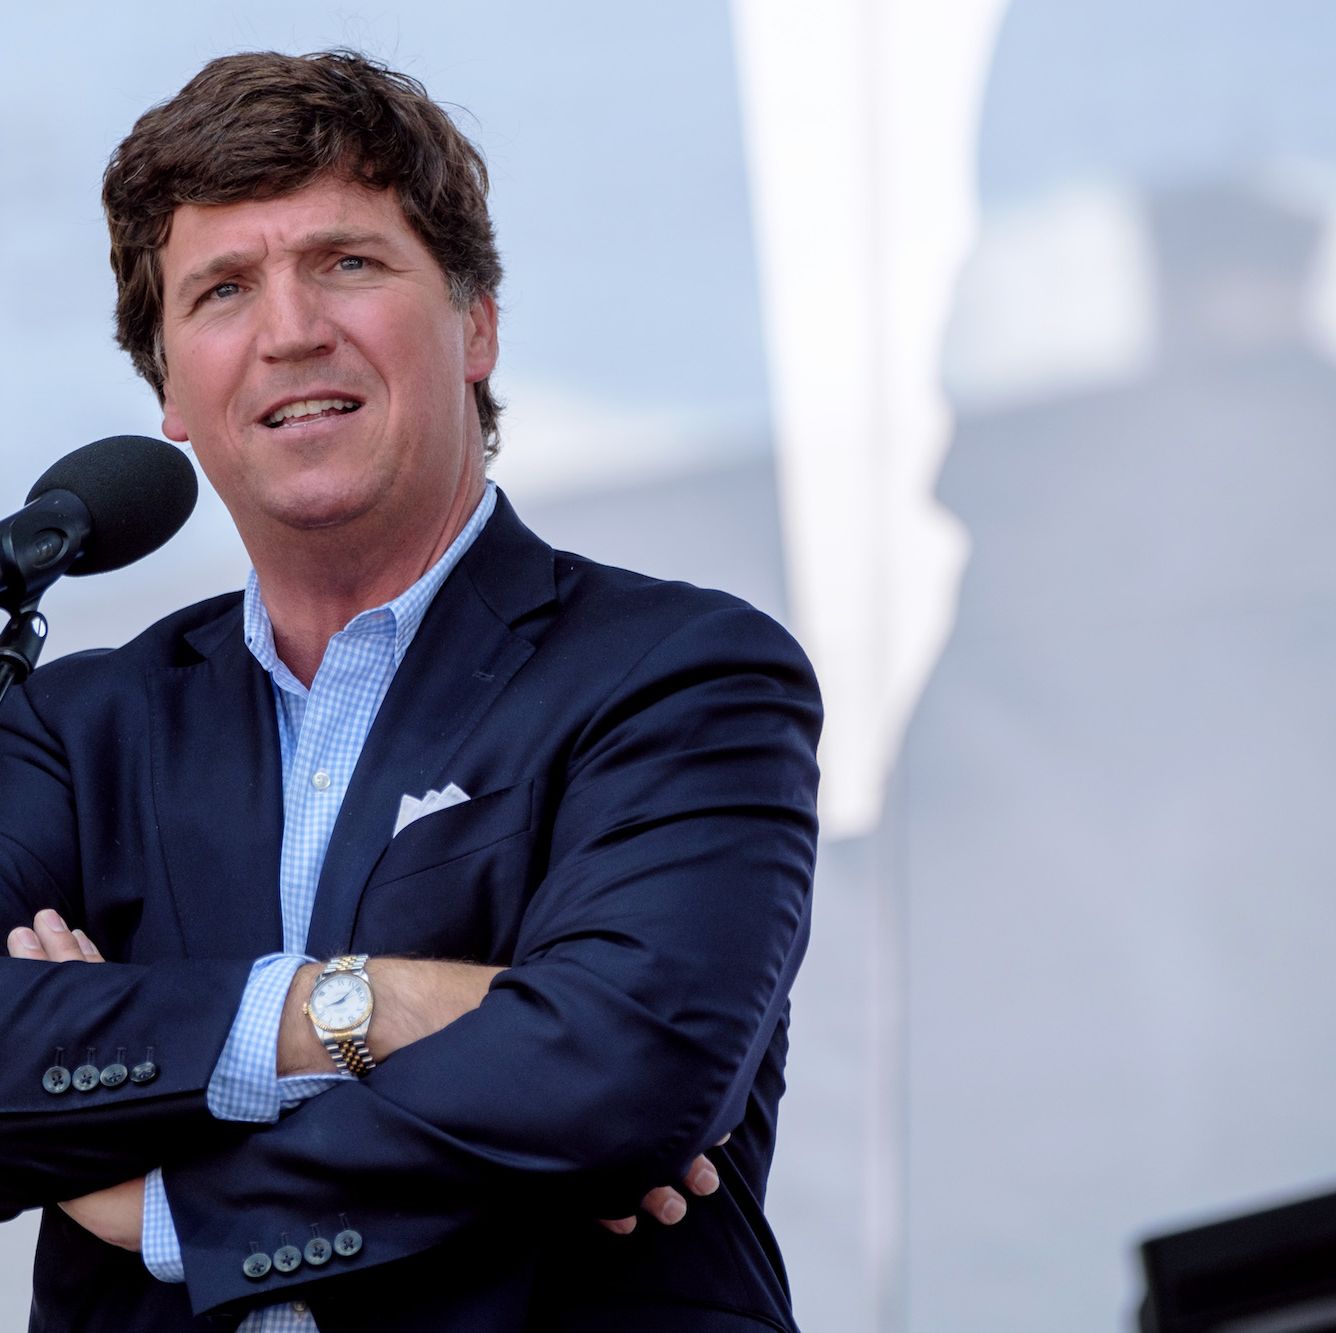 Tucker Carlson Says He Tries Not to Lie on TV, Is Not Always Successful